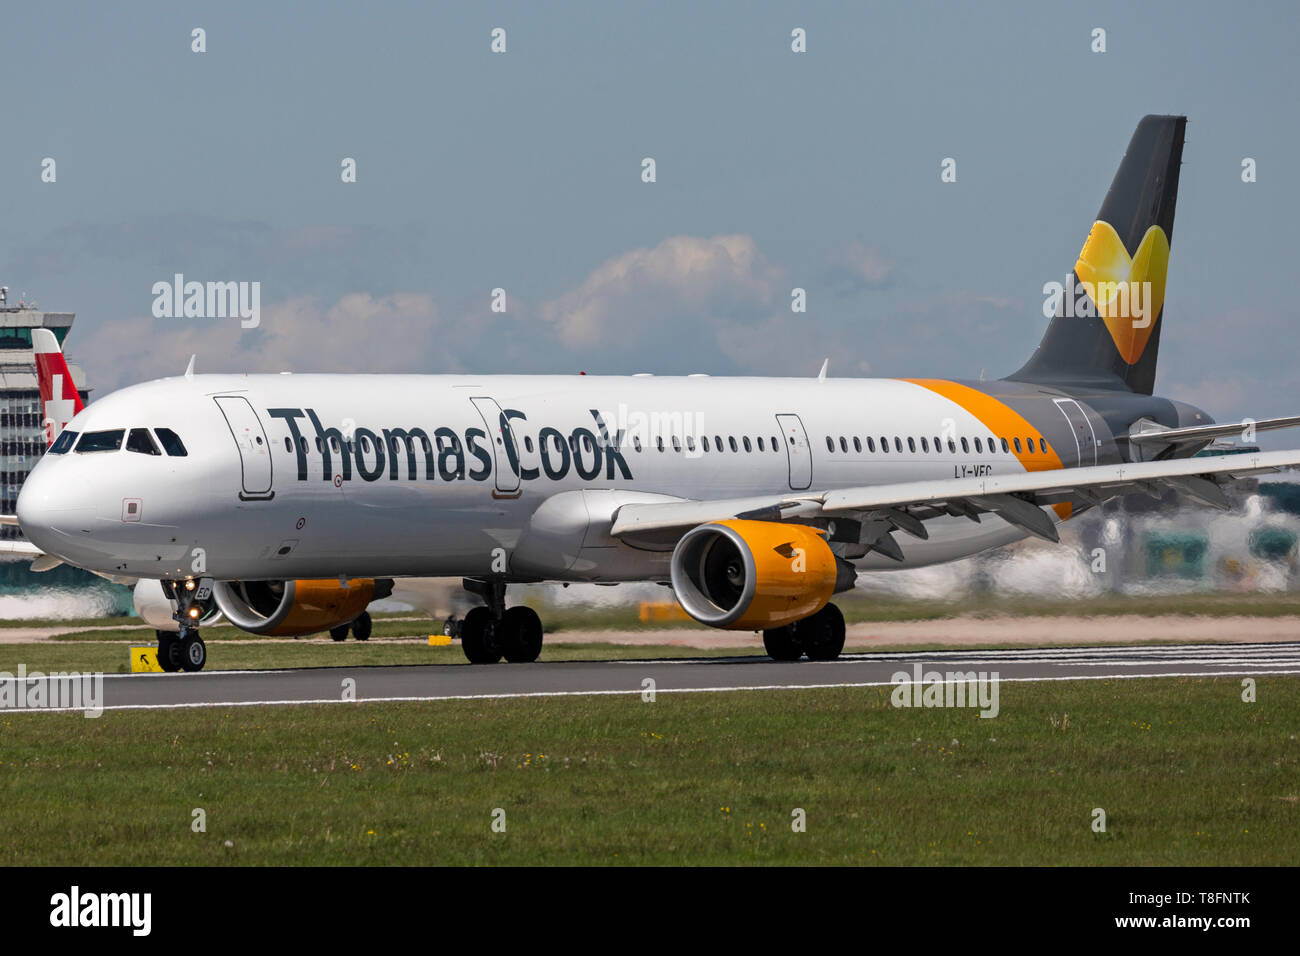 Thomas Cook Airbus A321-200, registration LY-VEC, preparing for take off from Manchester Airport, England. Stock Photo